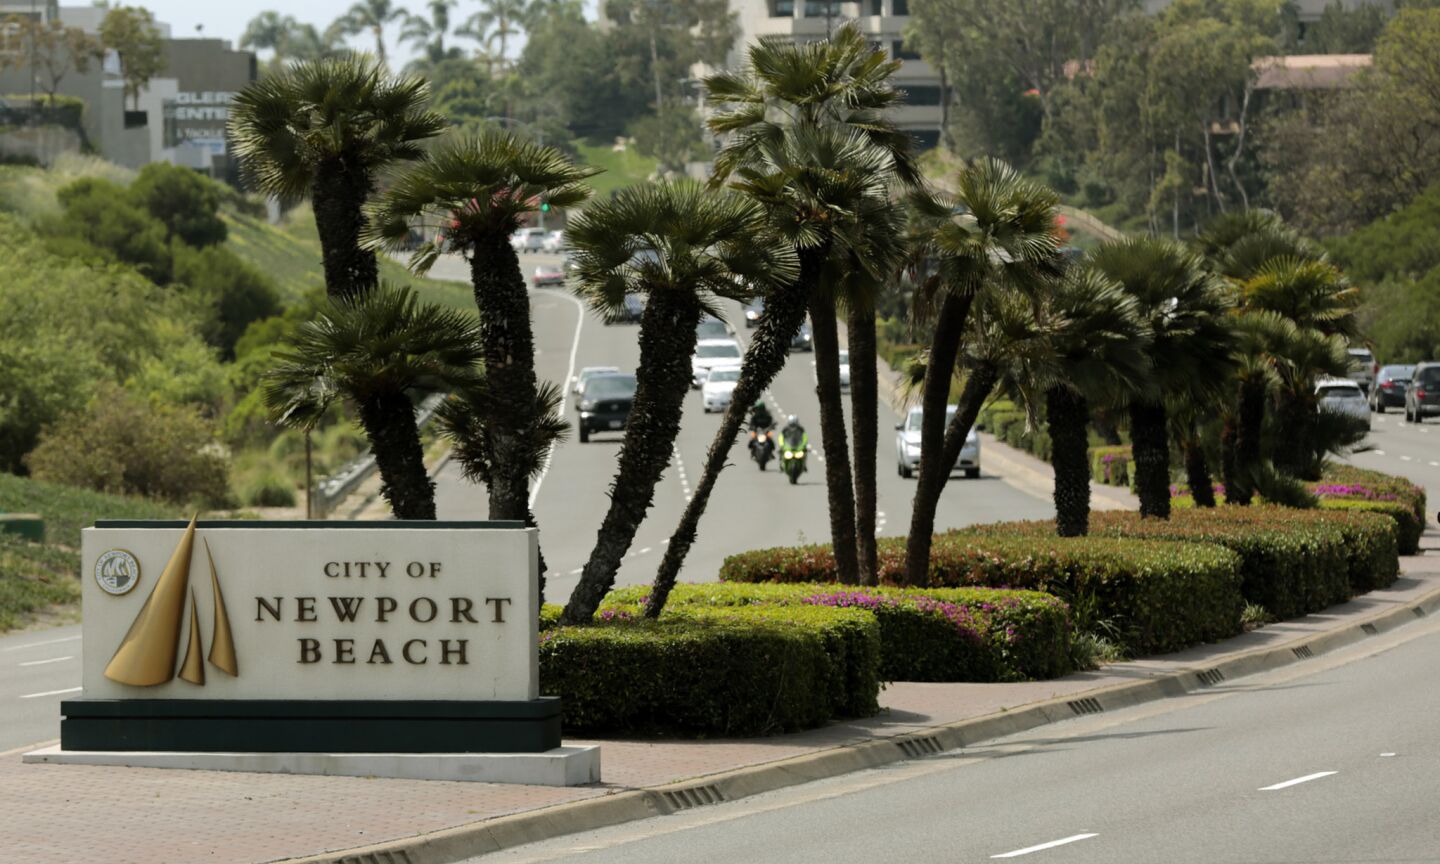 A sign welcomes visitors to Newport Beach.